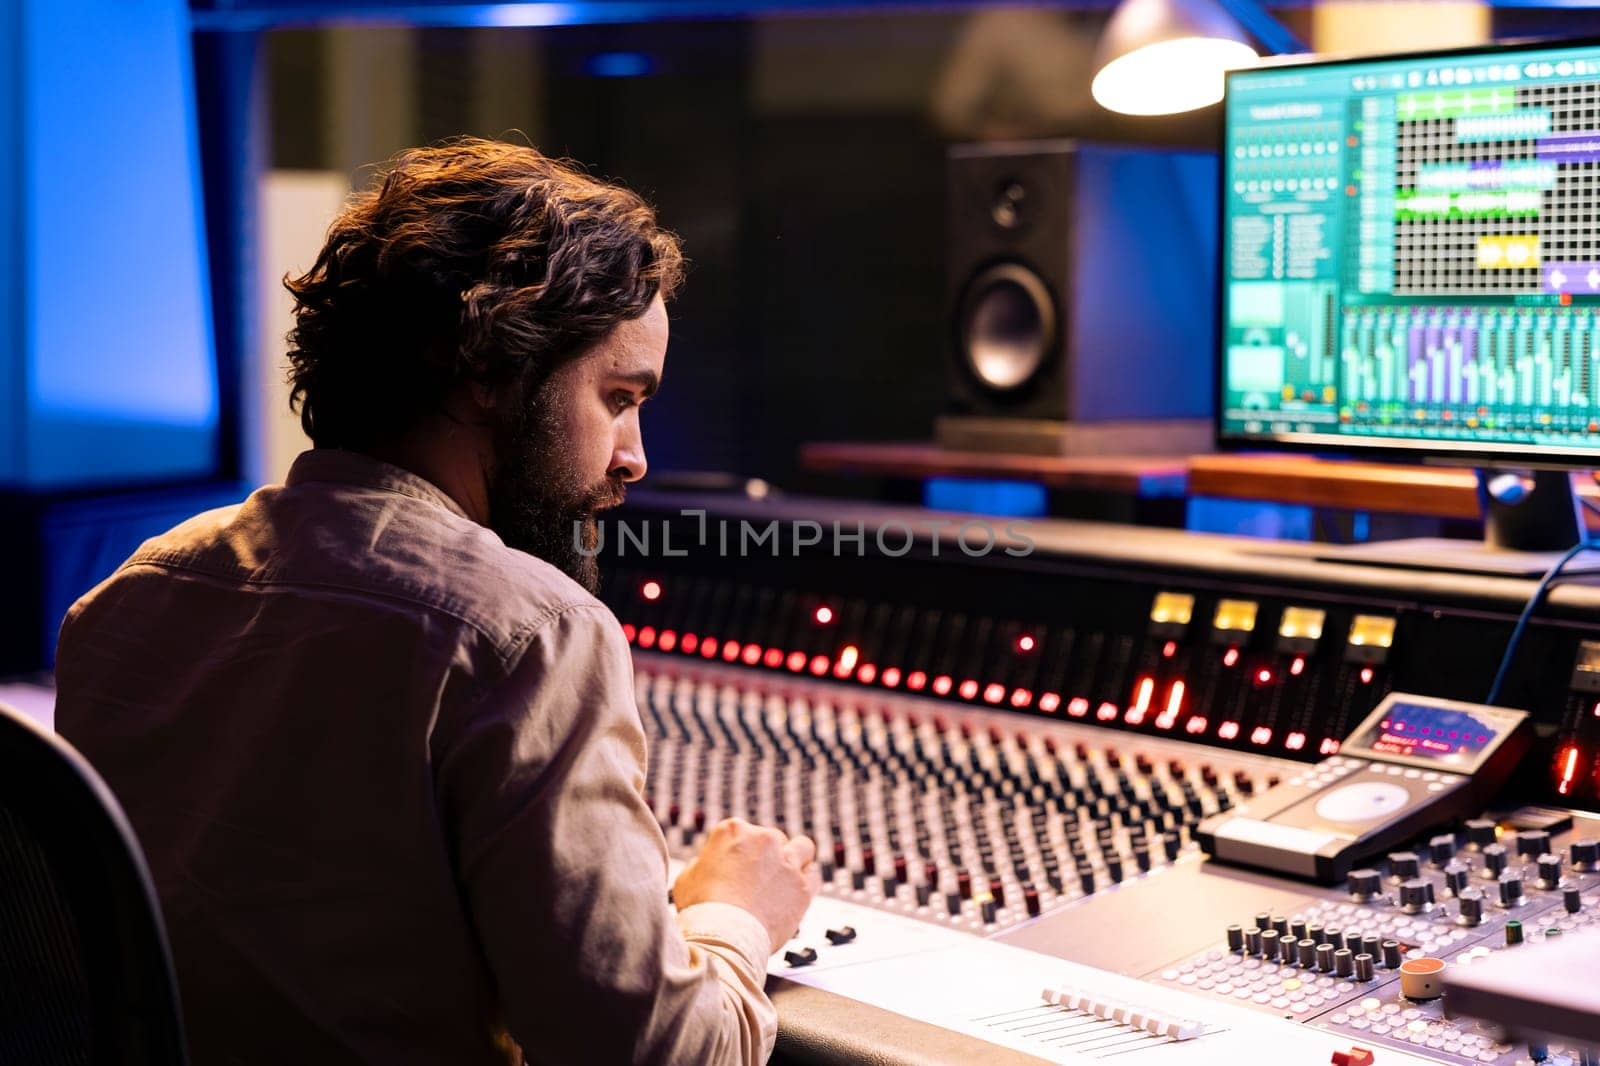 Music producer working on mixing and mastering music with daw software, editing tracks with audio console dashboard. Young sound designer creating sounds and tunes in professional studio.